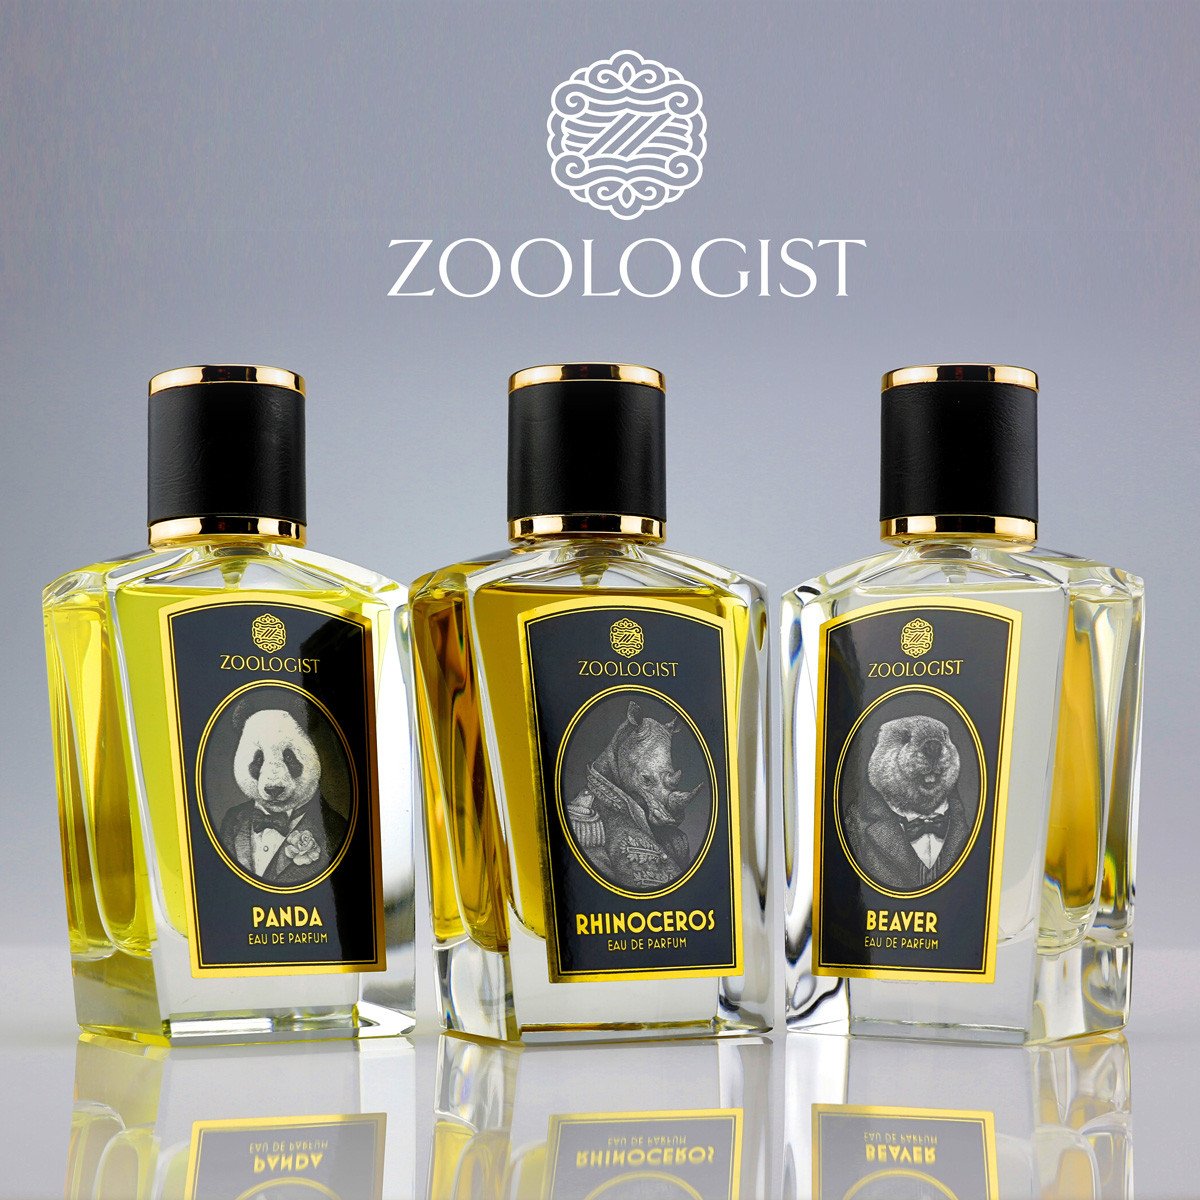 Zoologist Perfumes Launches Unique Line of Animal-Inspired Perfumes: Beaver, Panda and Rhinoceros